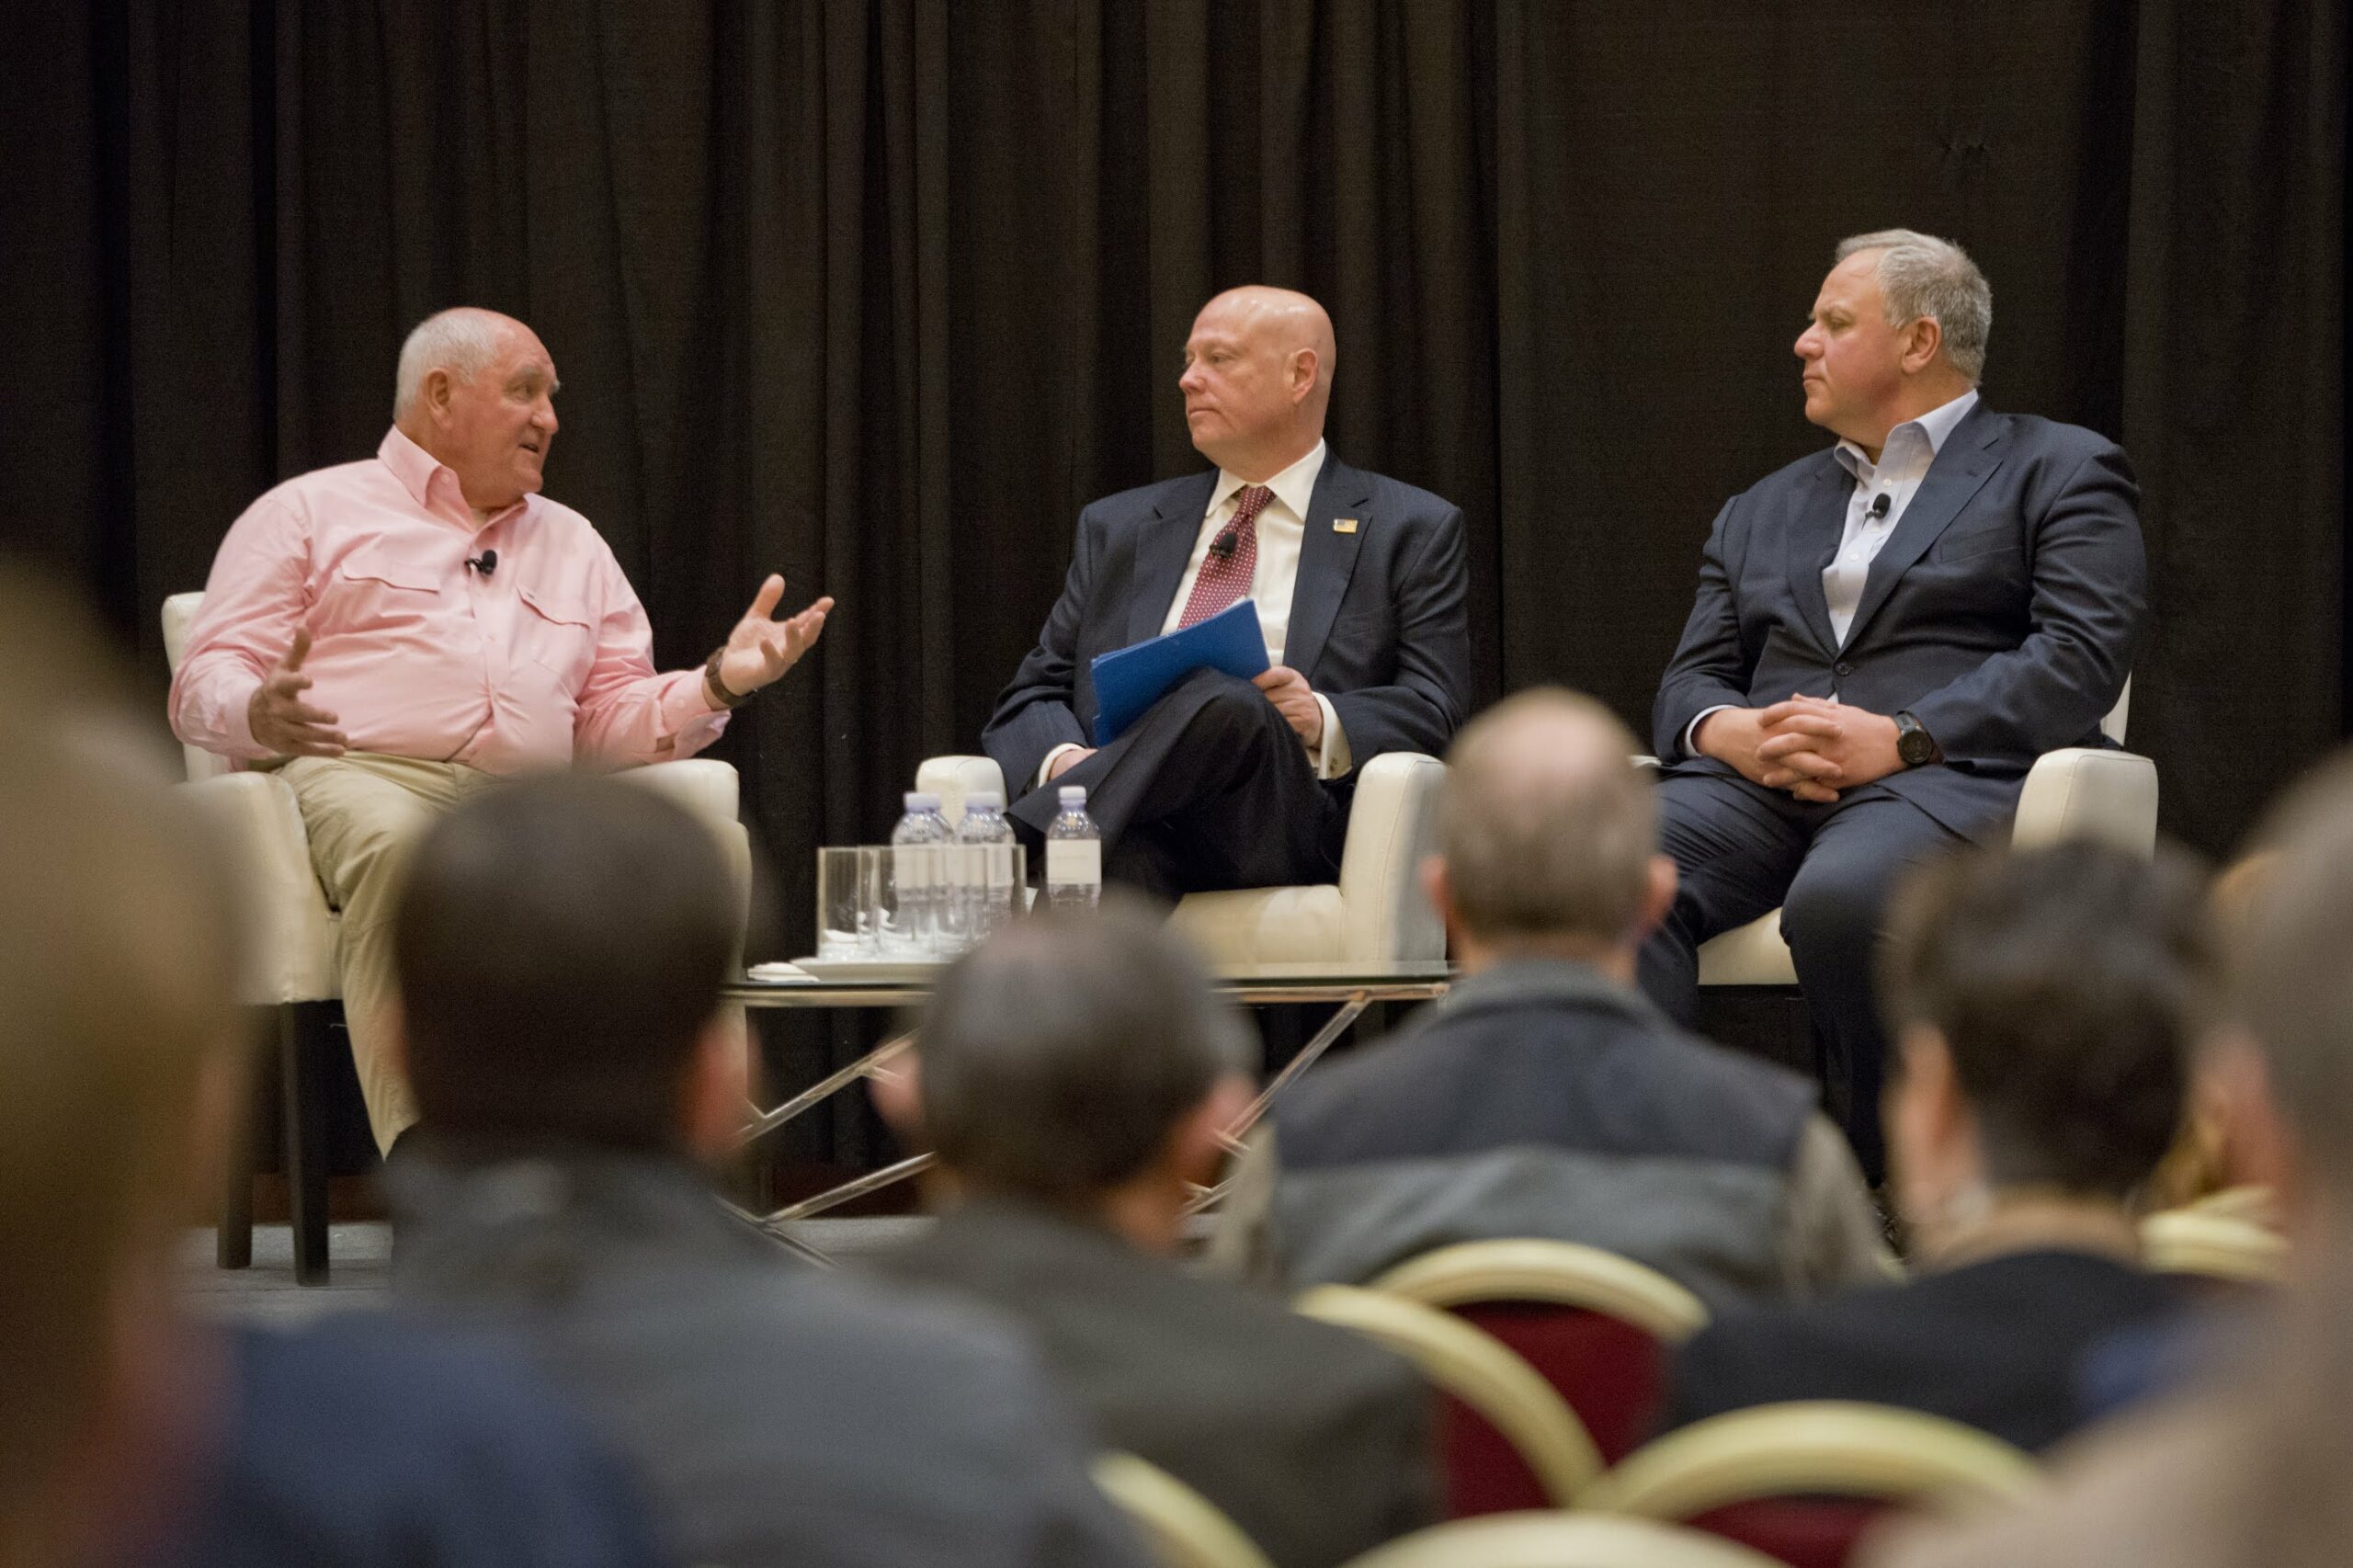 Photo of Perdue and Bernhardt speaking at the SHOT show